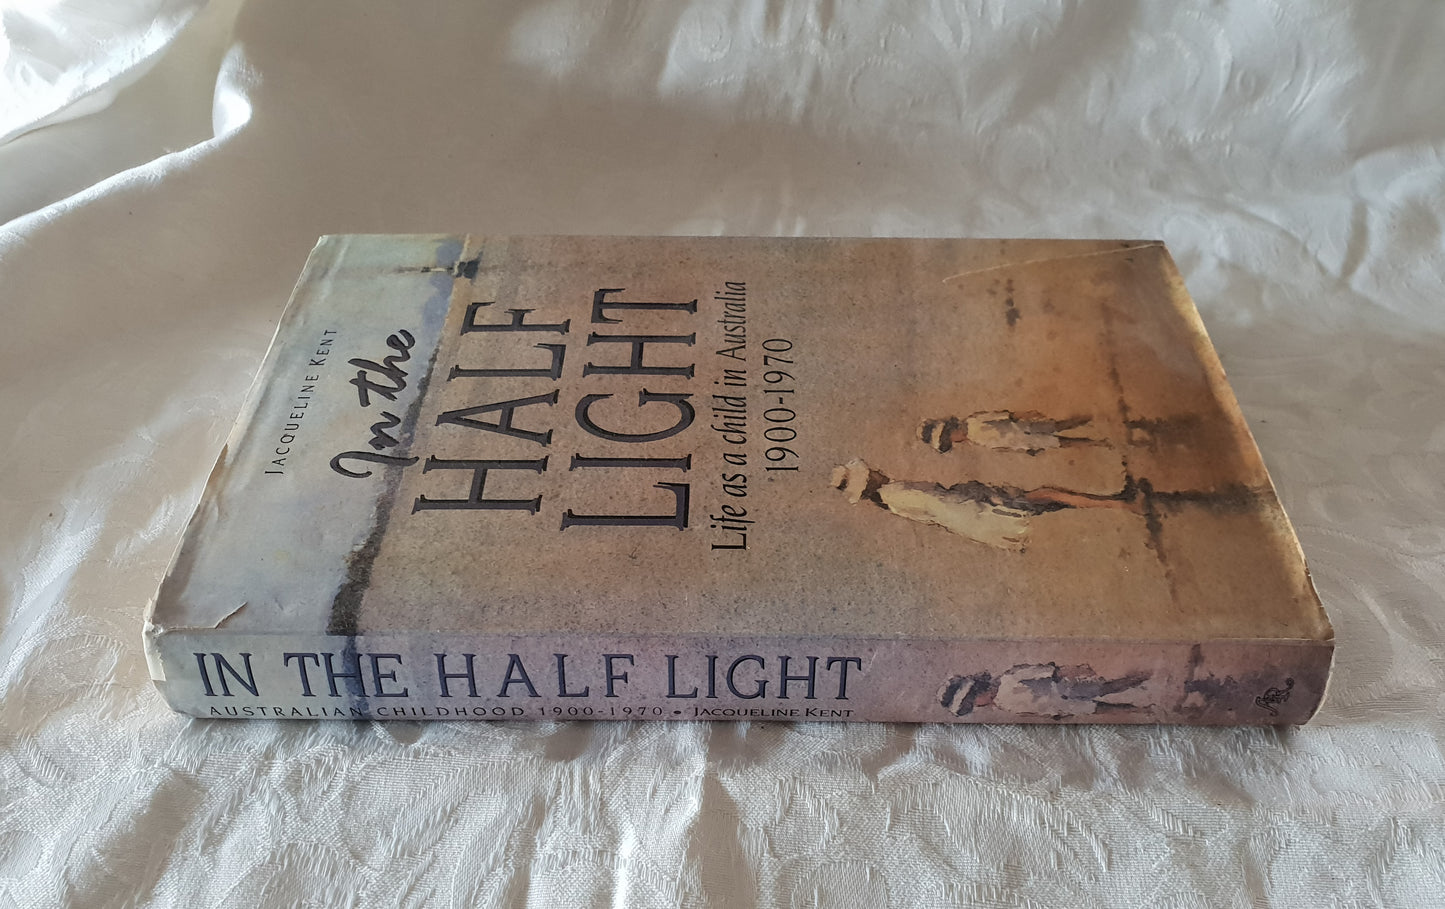 In The Half Light by Jacqueline Kent